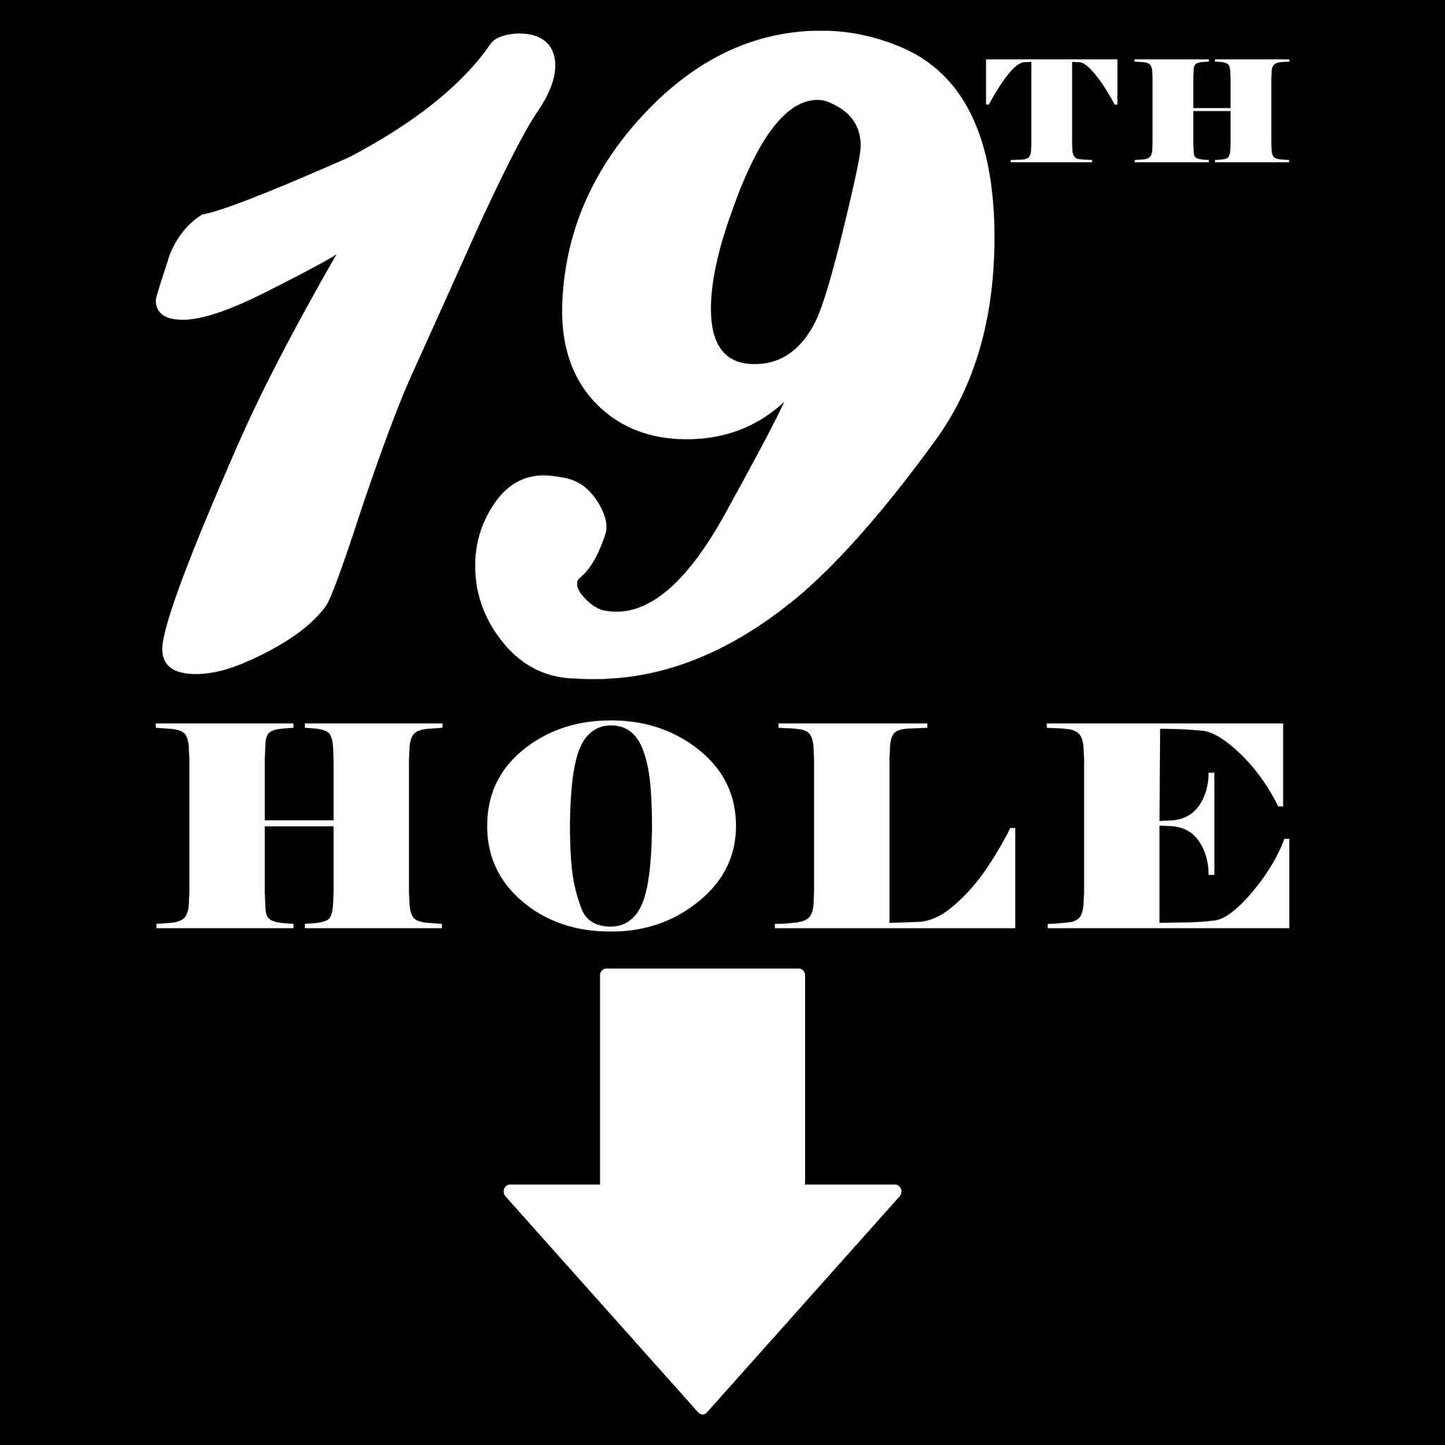 19th Hole - * Print on Back T-shirt in the color: Black - Kaspers Tees